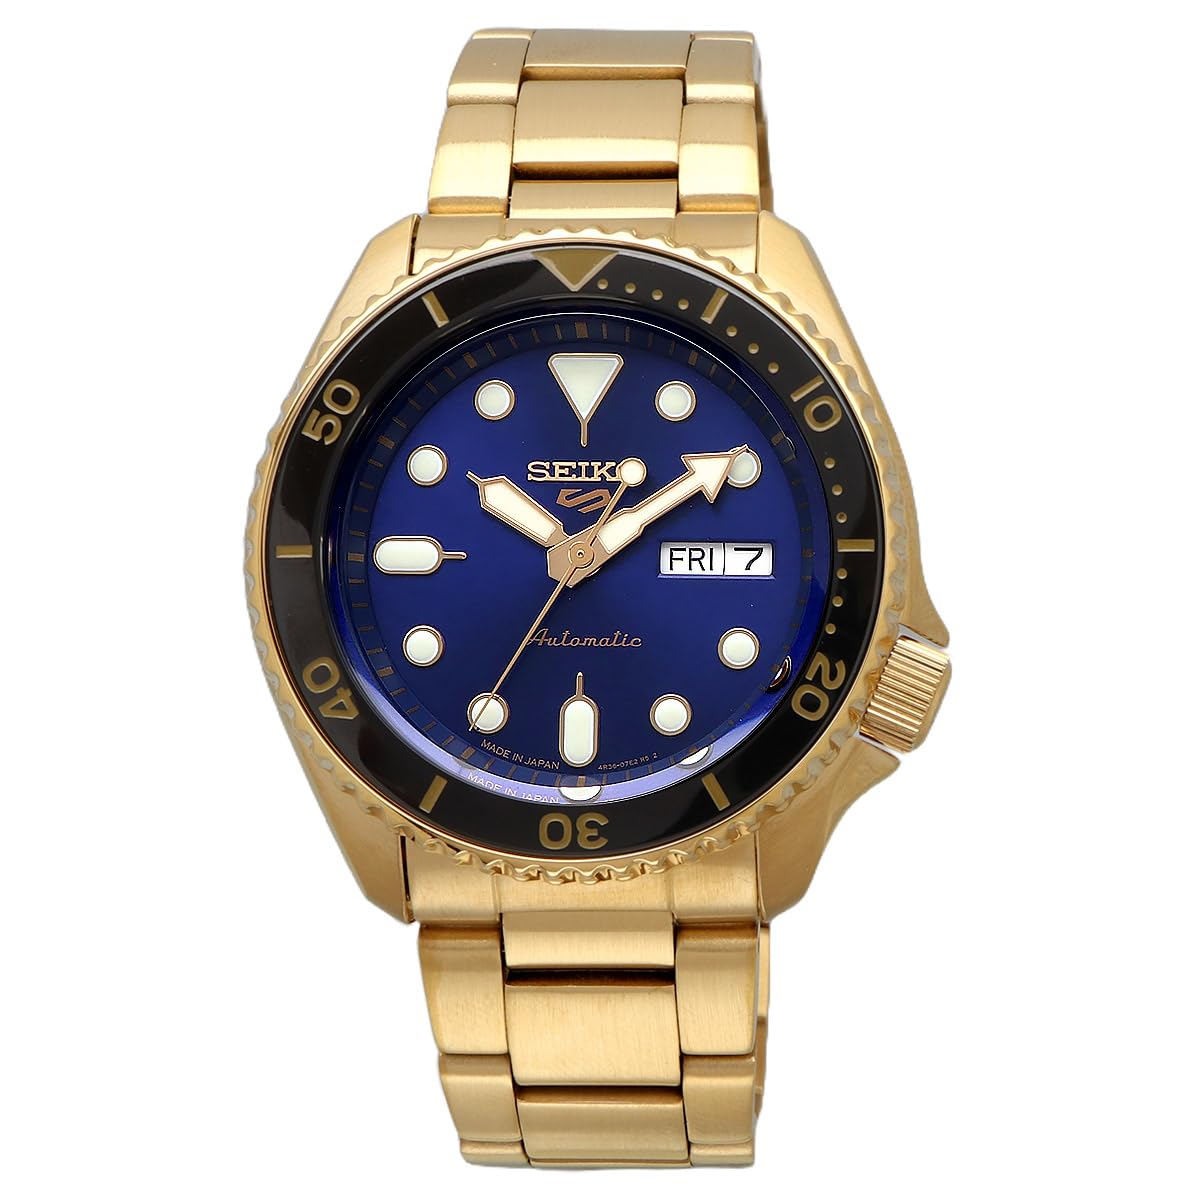 Seiko SRPK20 Men's 5 Sports Skx Sports Style Automatic Watch, Made in Japan, Made in Japan, U.S. Special Creation SRPK20, Cobalt Blue x Gold, Sporty